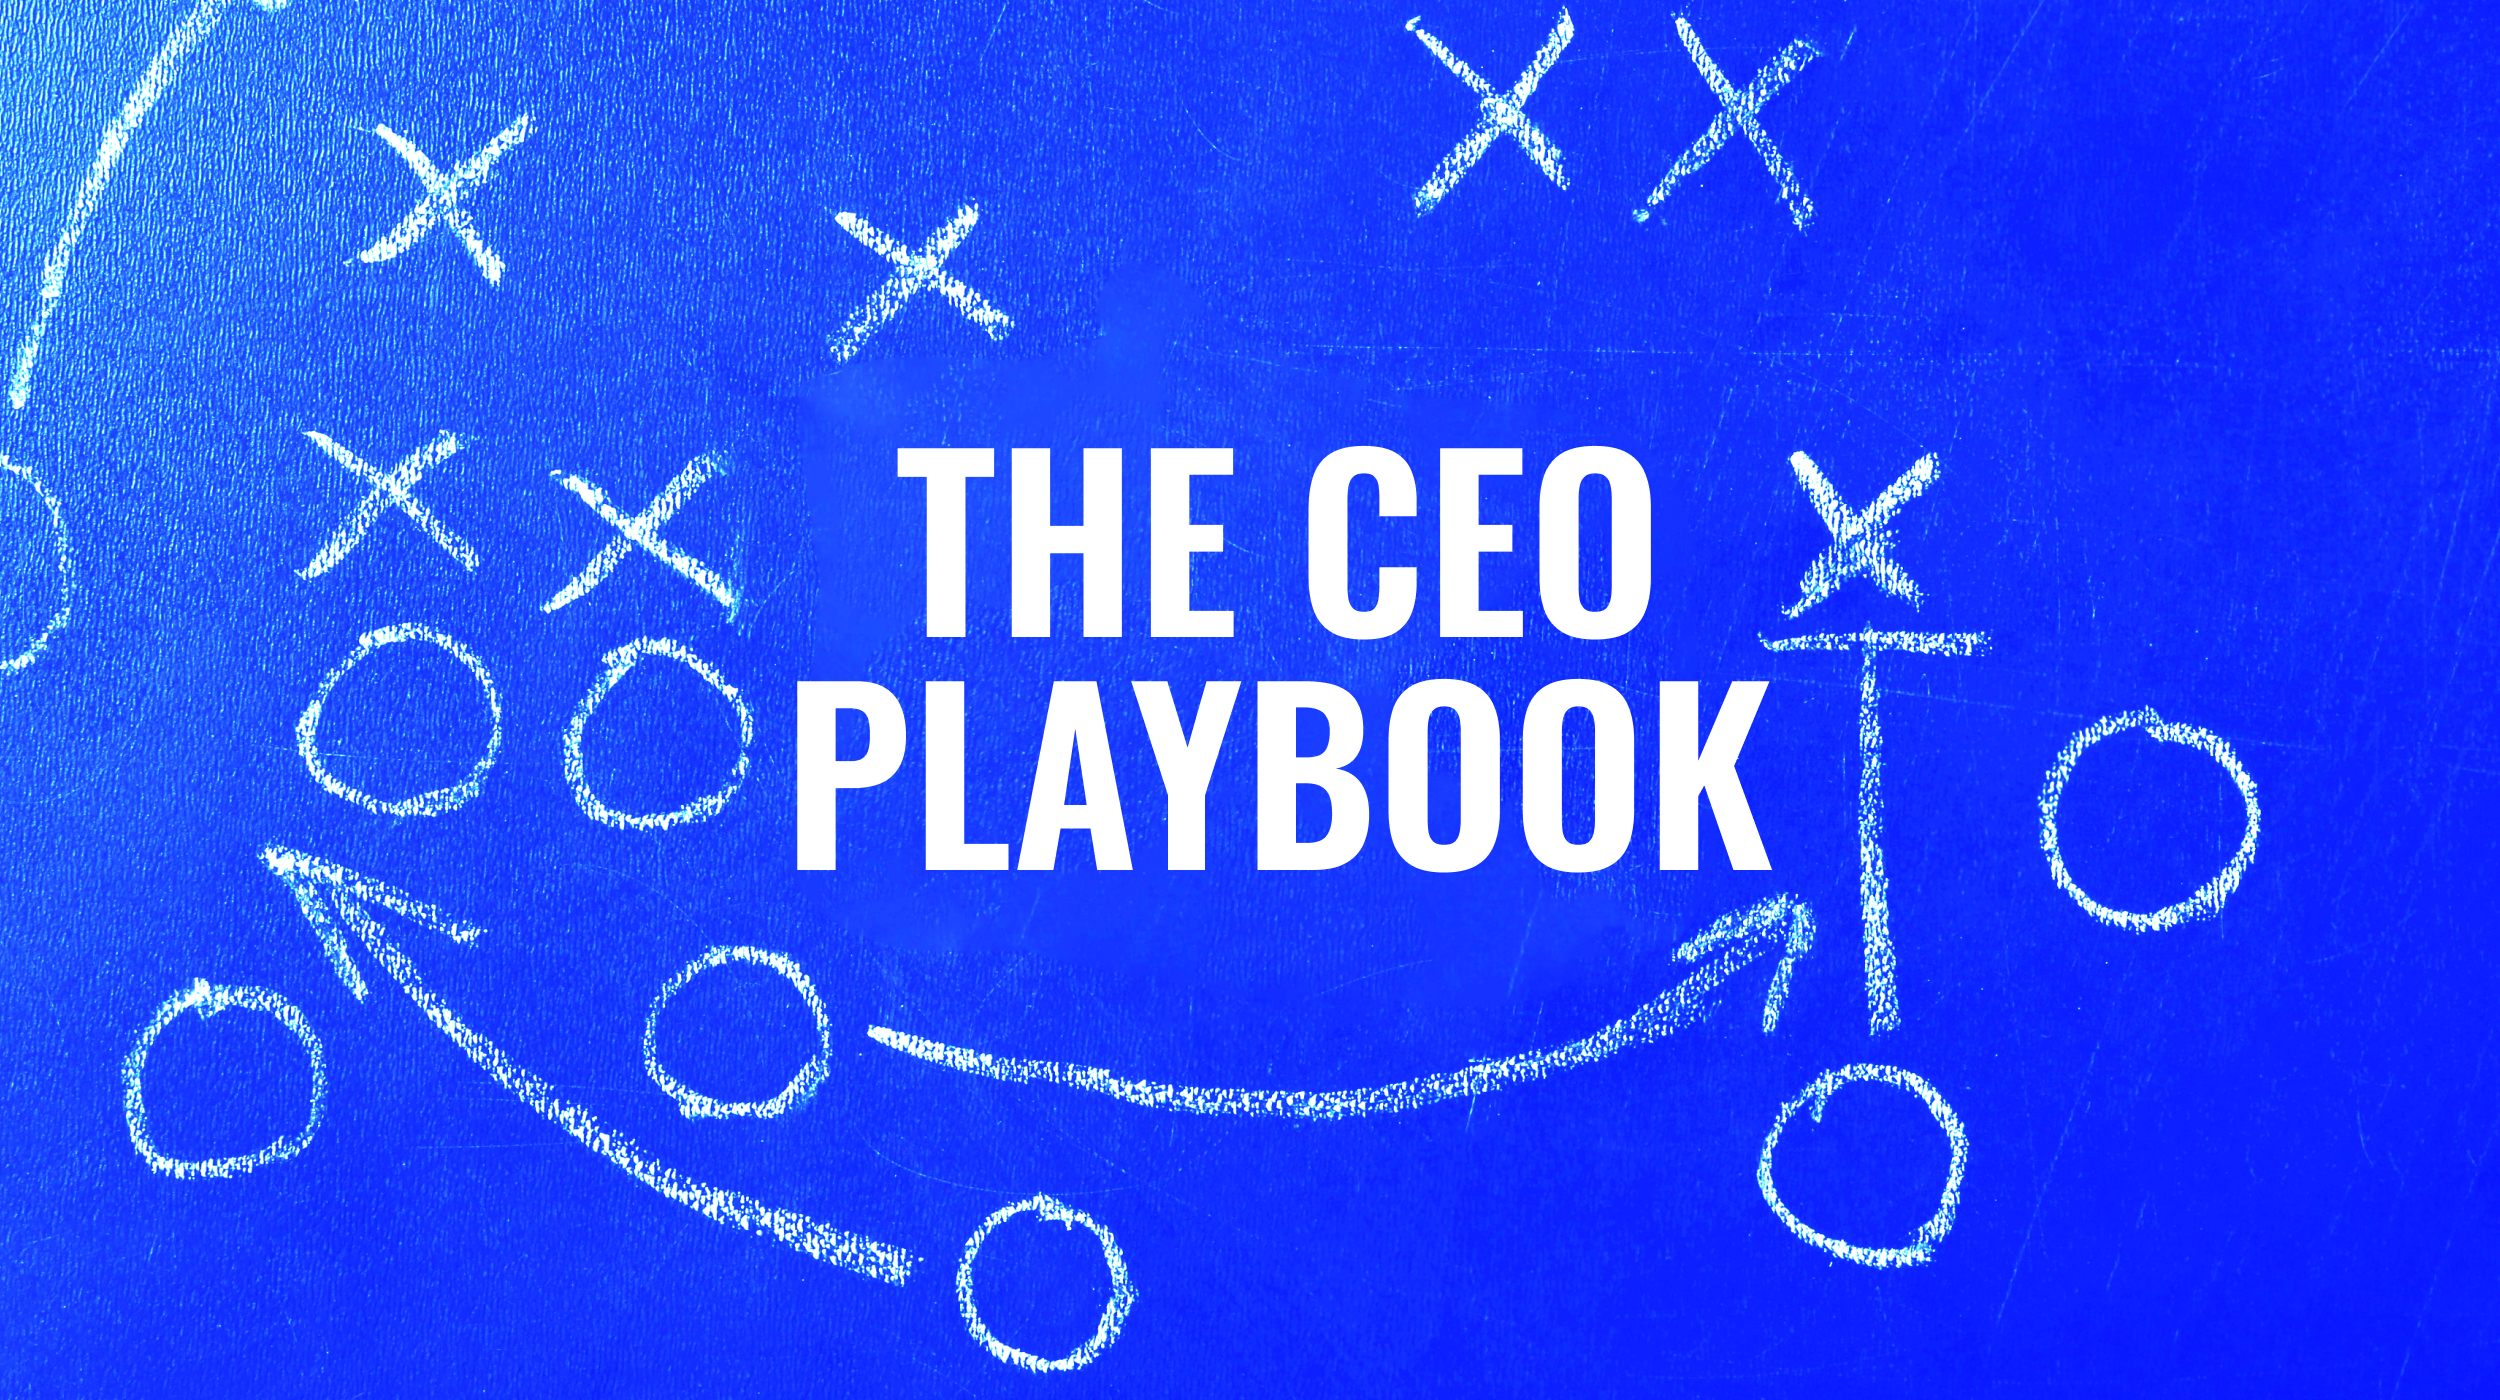 The ceo playbook on a blue background.